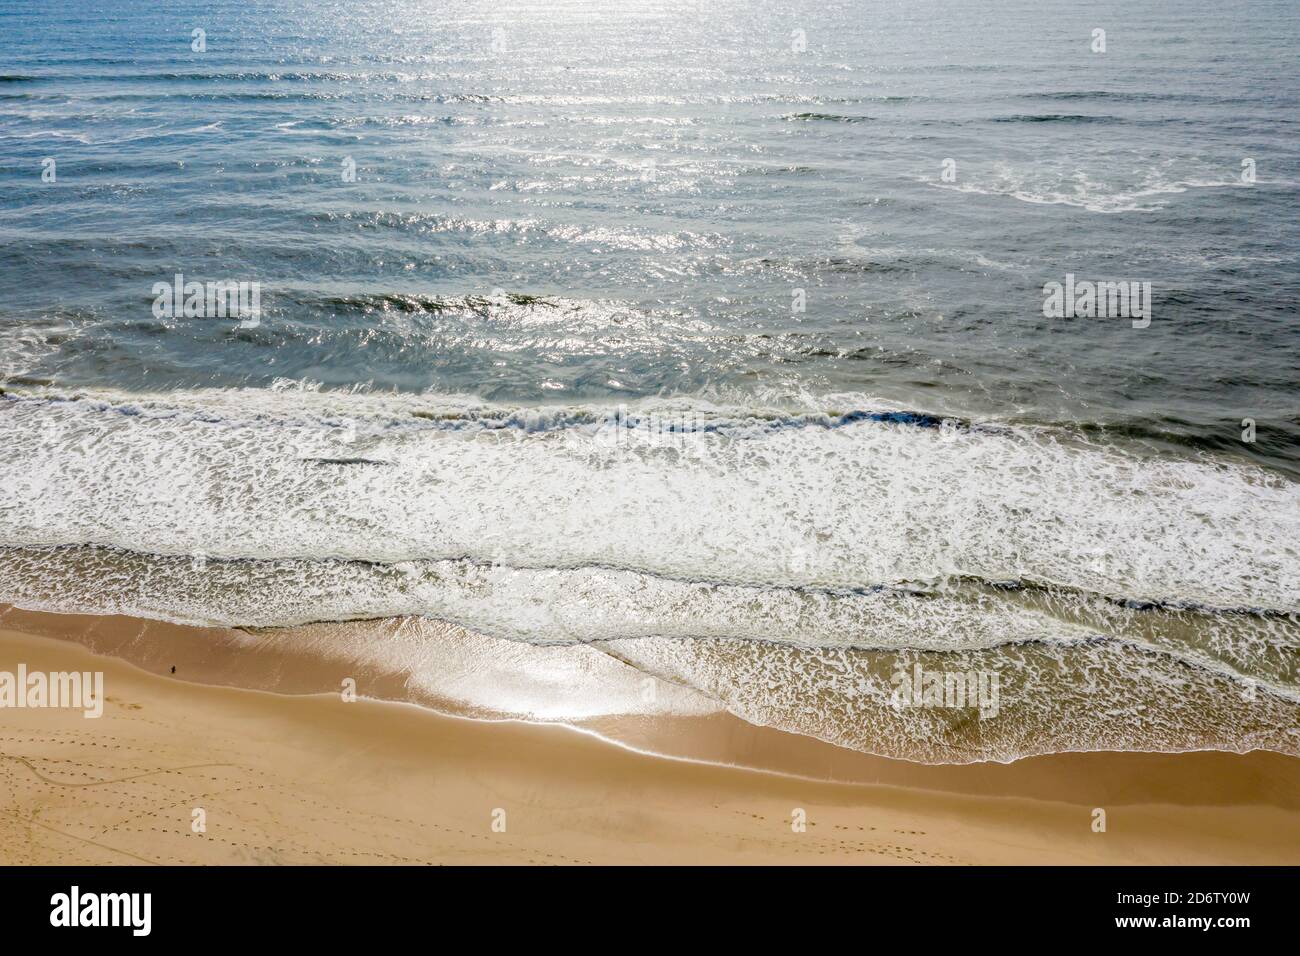 Aerial image of Amagansett and the ocean beach Stock Photo